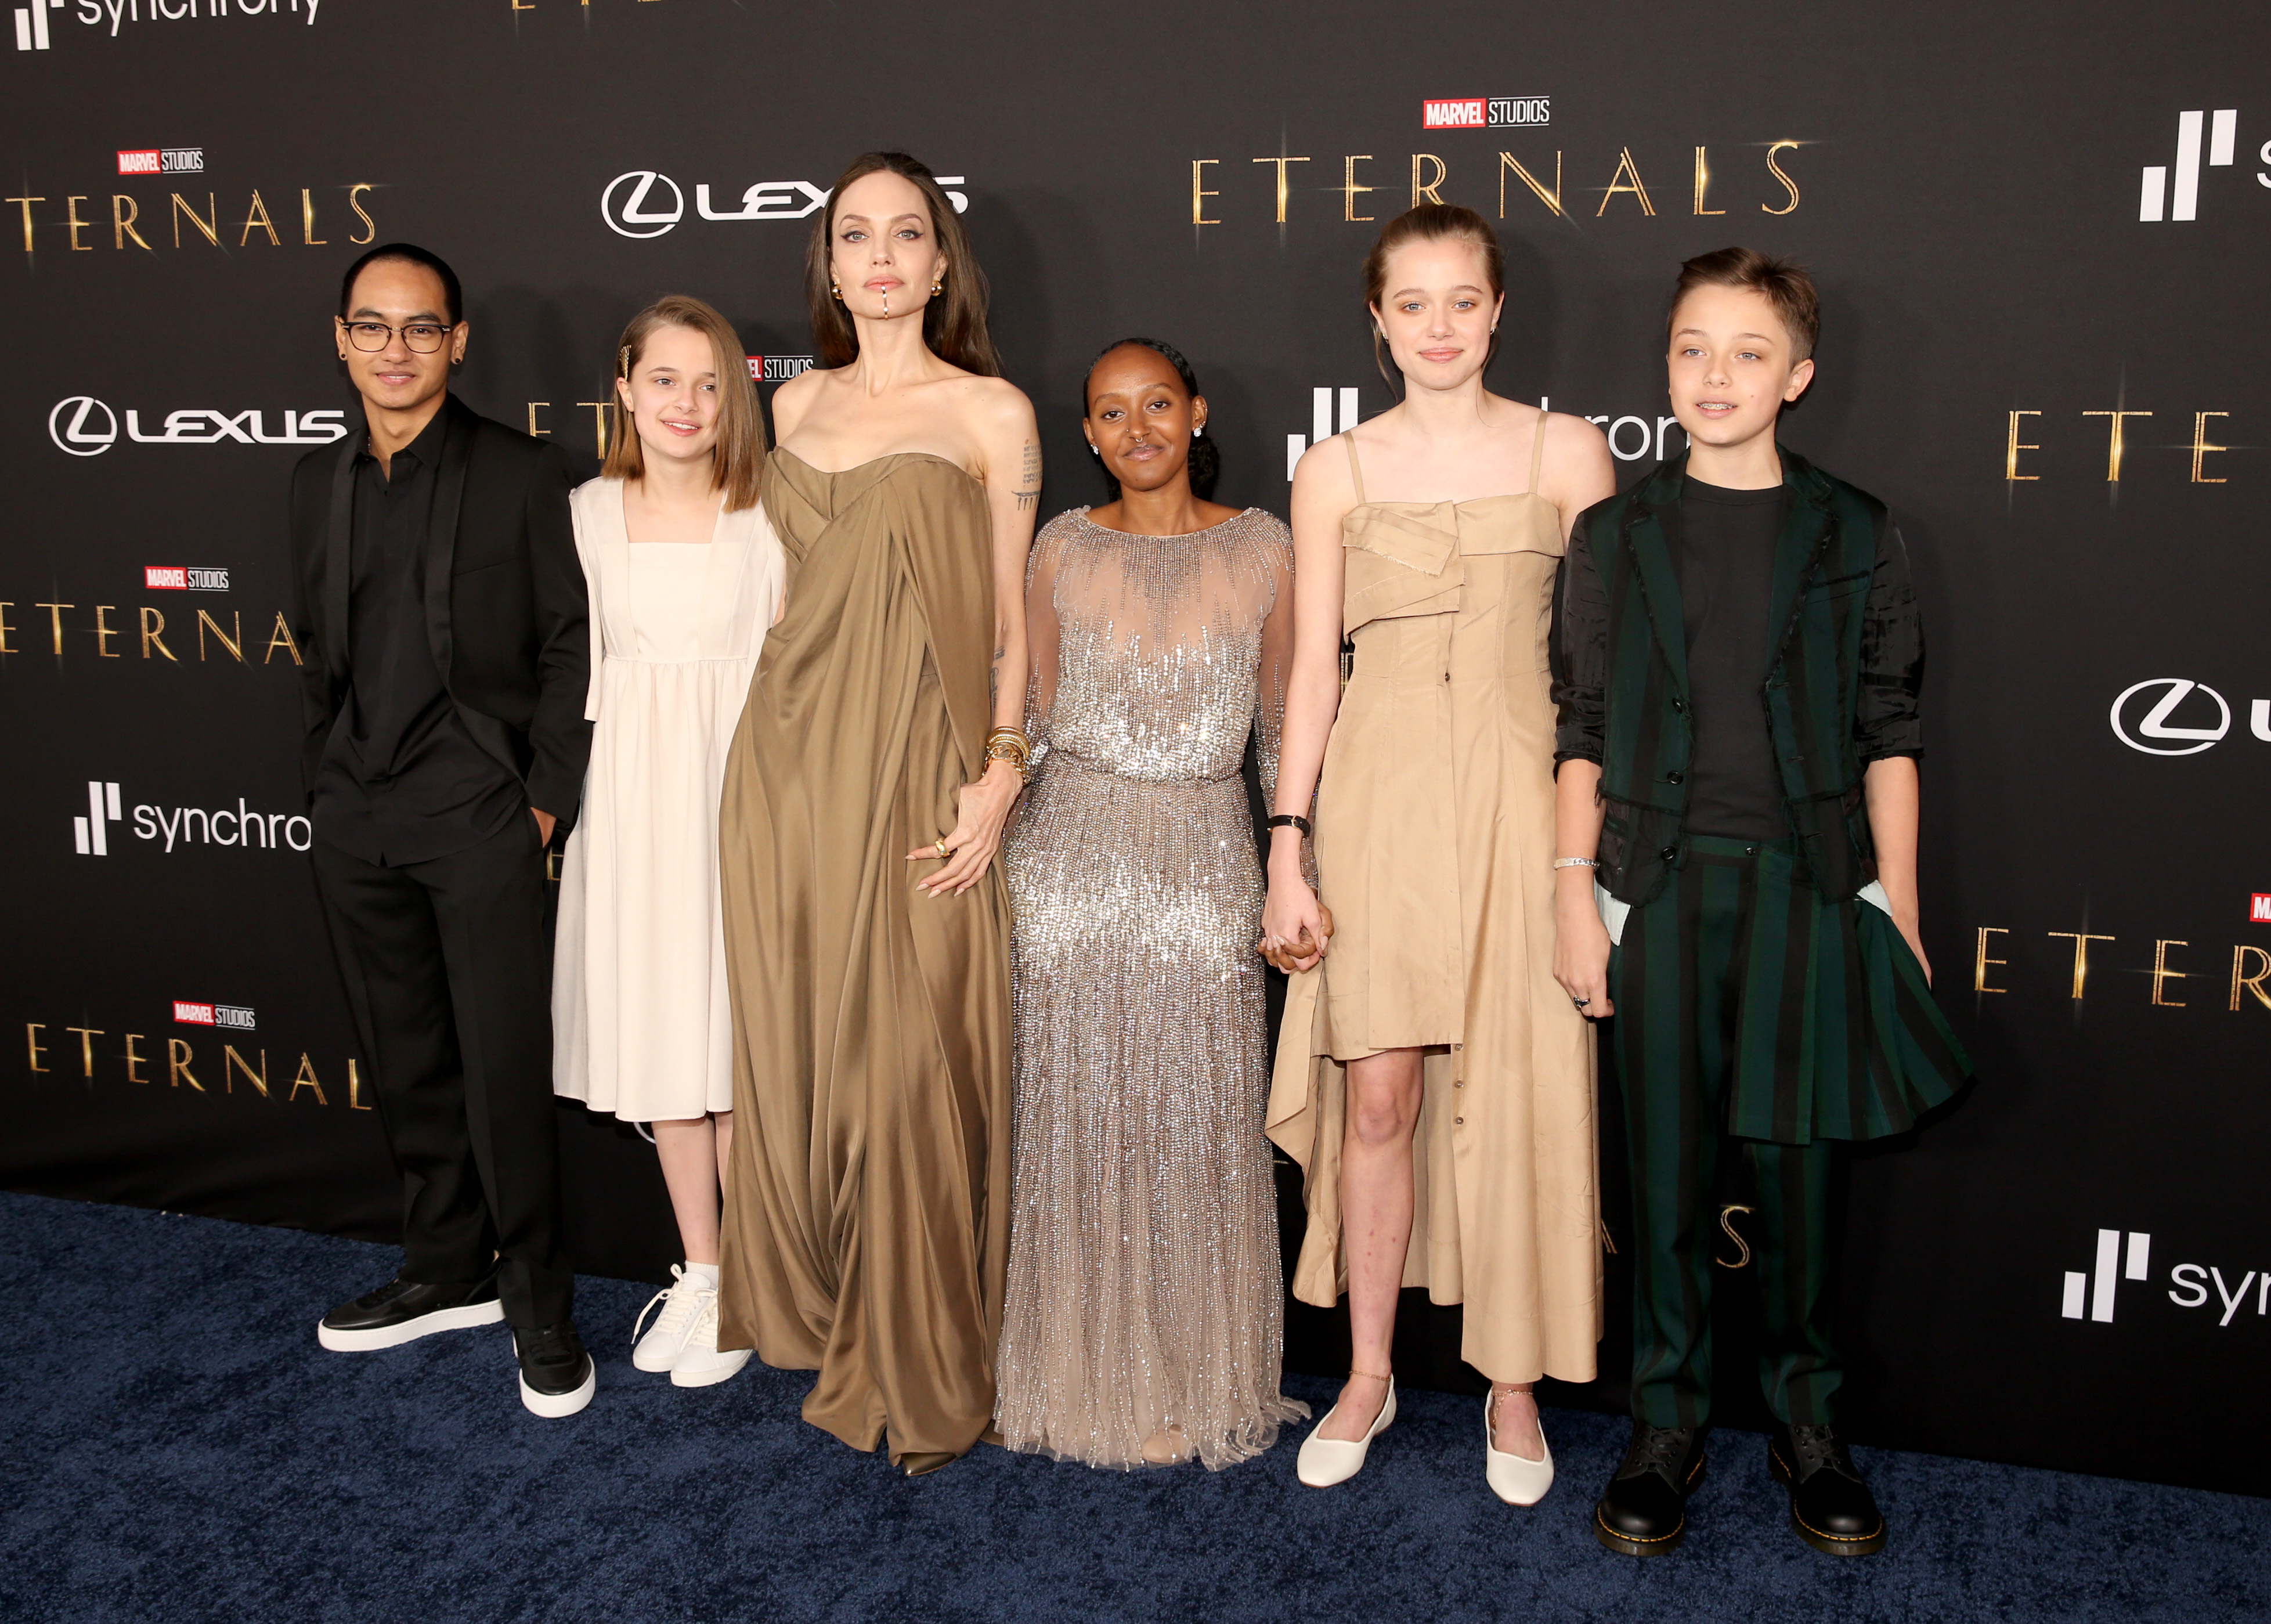 Angelina Jolie with her children, Maddox, Vivienne, Zahara, Shiloh, and Knox Jolie-Pitt at the premiere of Marvel Studios' "Eternals" in Hollywood, California on October 18, 2021 | Source: Getty Images